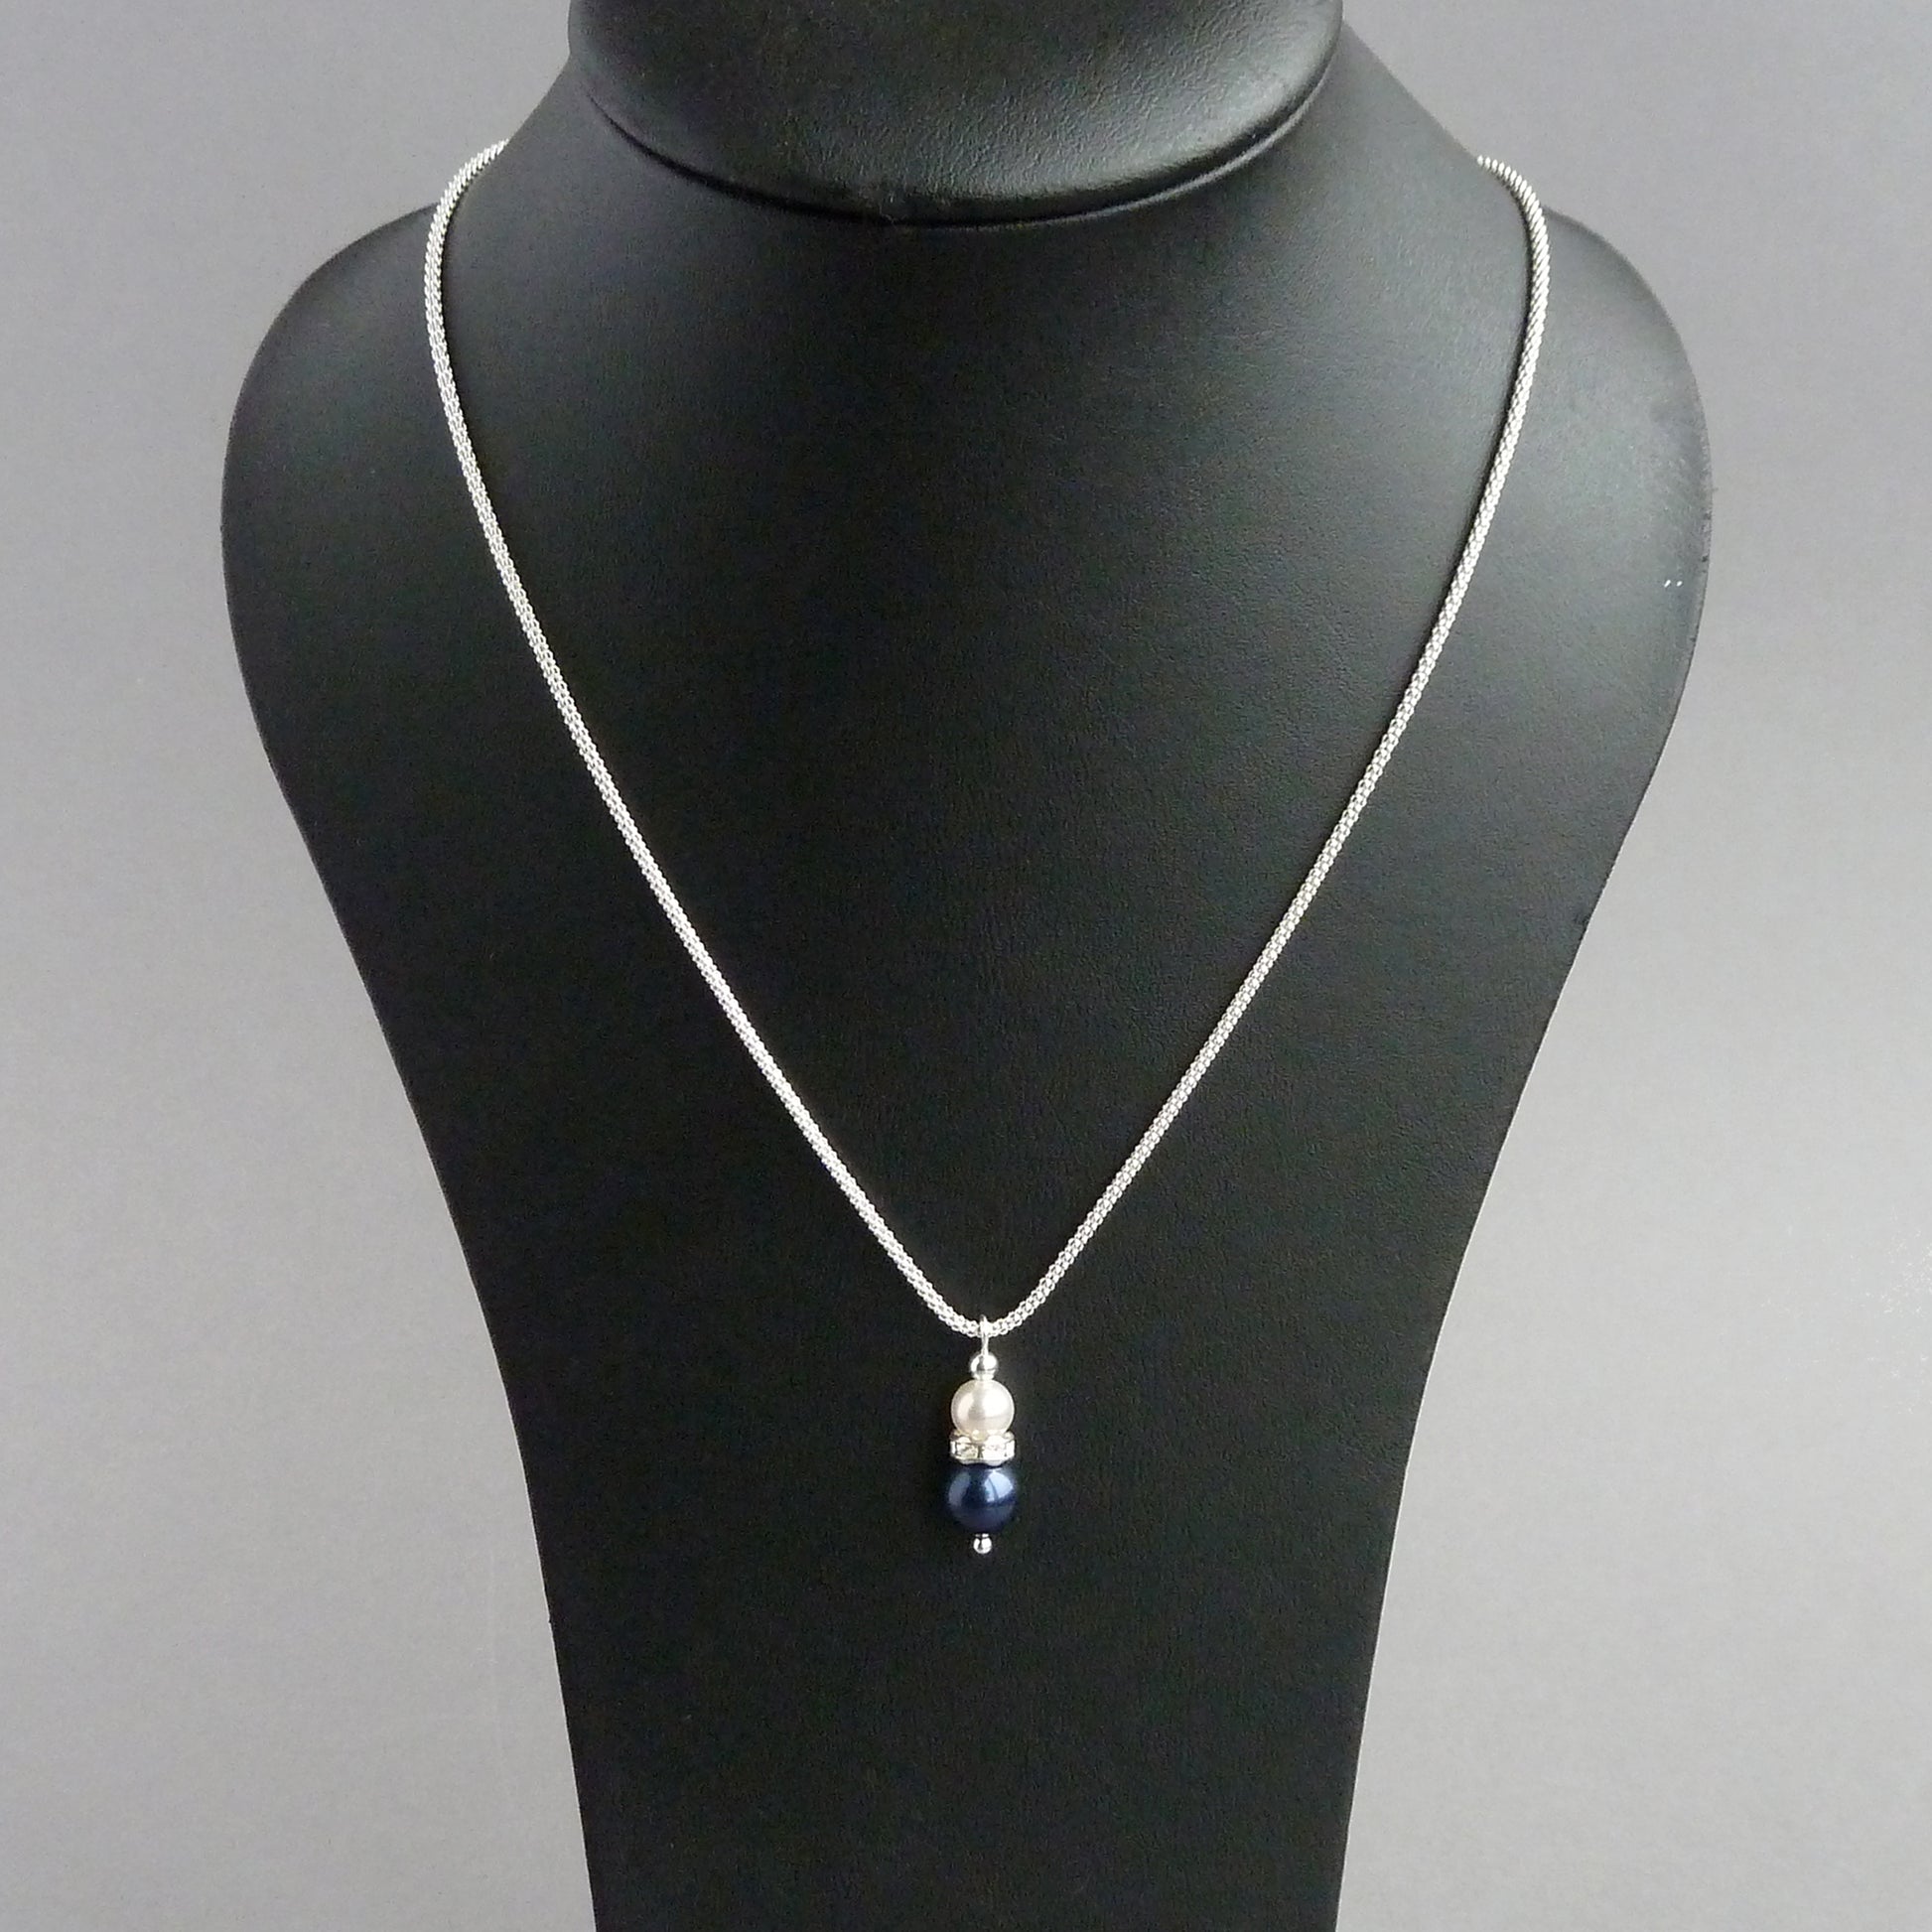 Midnight blue pearl necklace